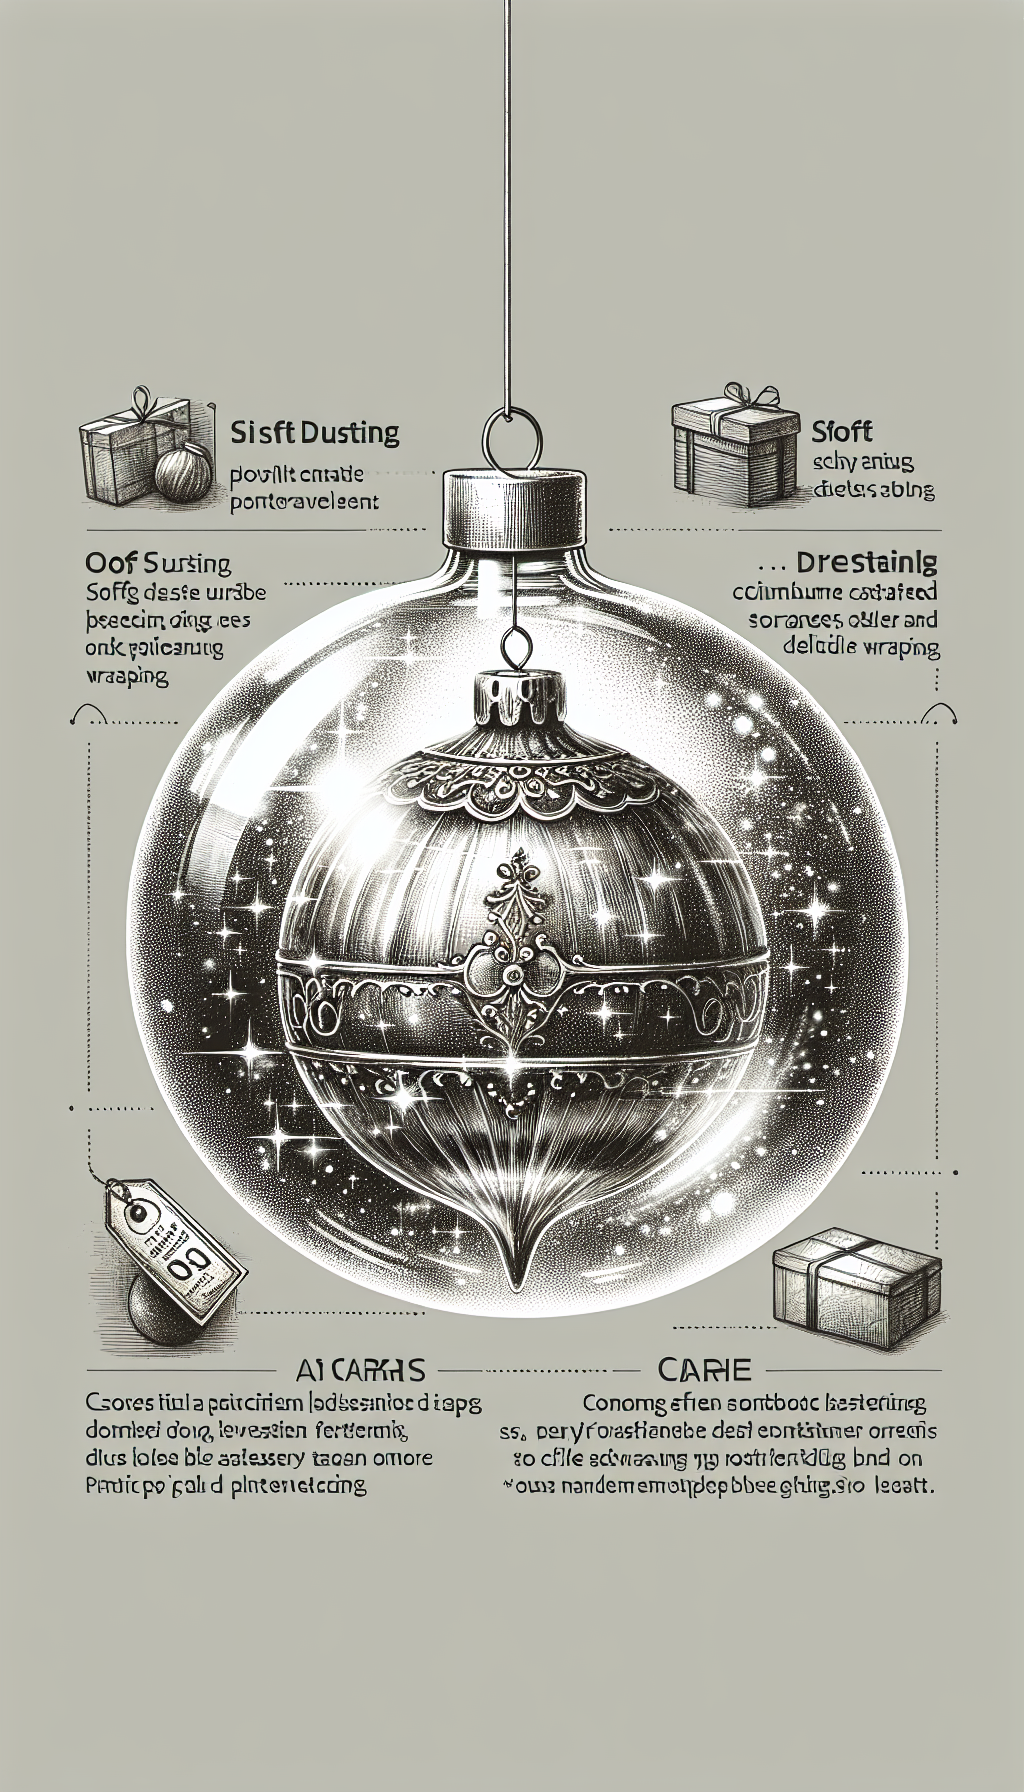 An illustration of an antique, glass-blown Christmas ornament delicately suspended within a shimmering, transparent bubble, symbolizing preservation. The bubble reflects vignettes of care tips—gentle dusting, climate-controlled storage, and tender wrapping—while in the background, a softly focused price tag with a hefty sum underscores the ornament's value. The styles range from photorealistic for the ornament to sketch-style for the care tips.